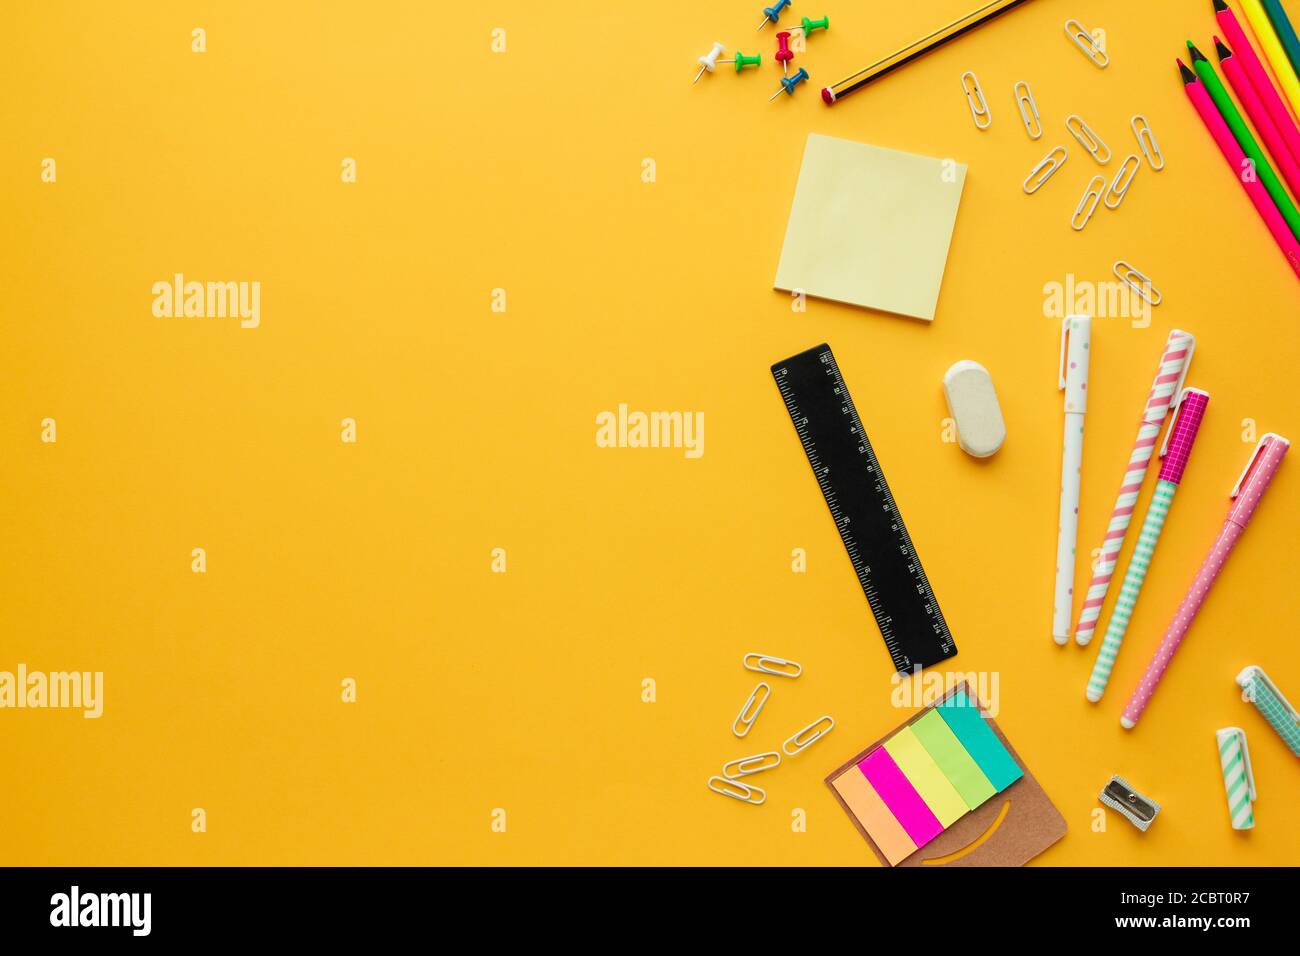 Stock photo of back to school concept with several stationery objects and copy space on the left to insert text Stock Photo